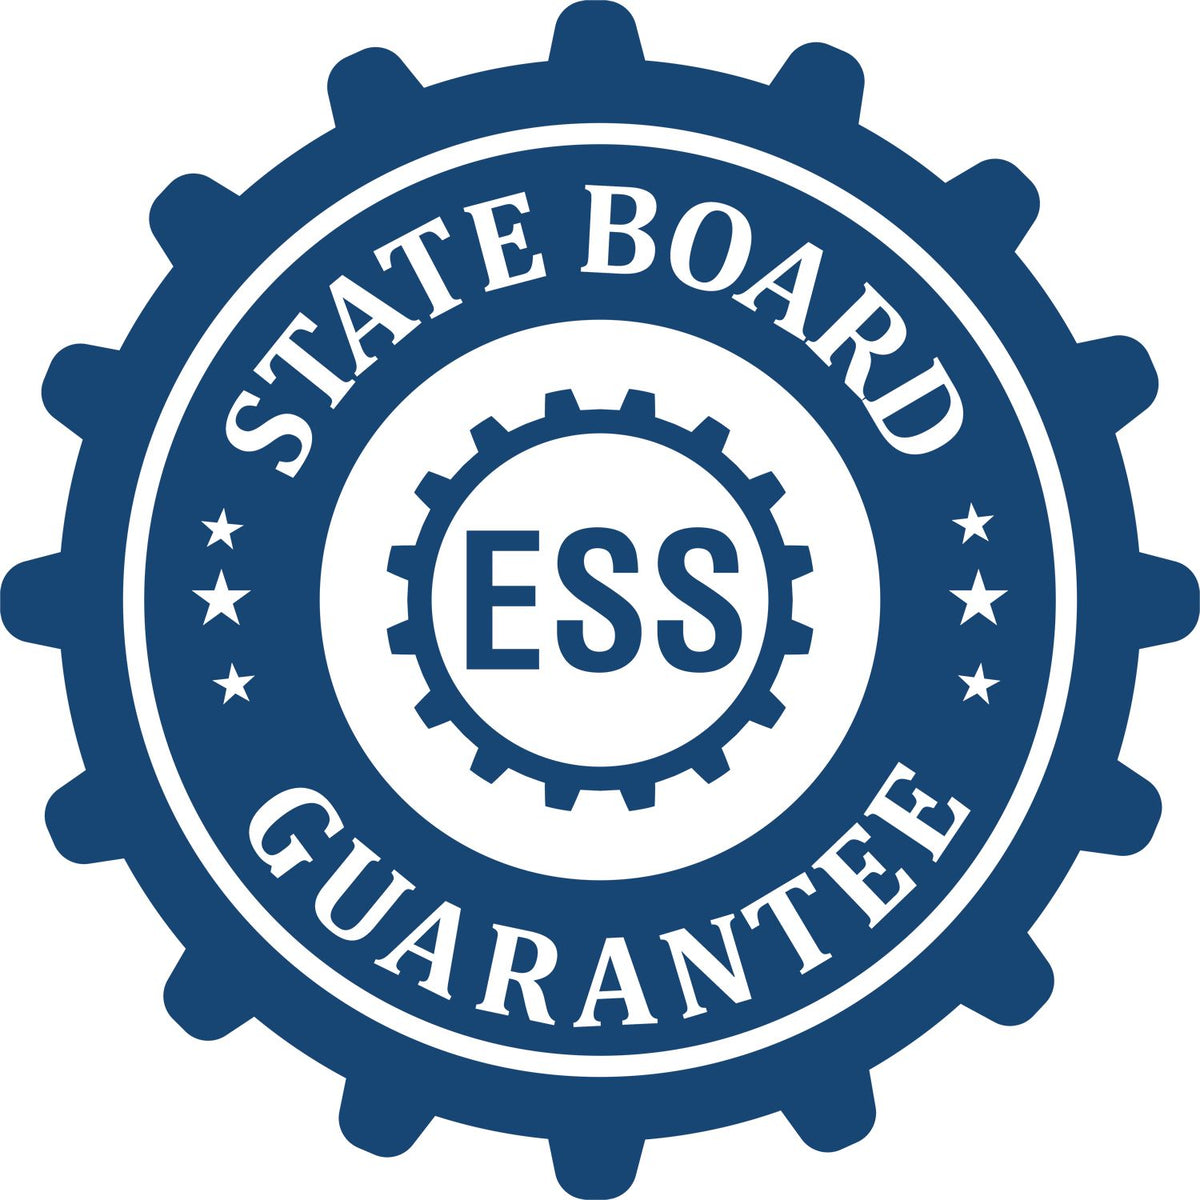 An emblem in a gear shape illustrating a state board guarantee for the Wooden Handle Missouri Rectangular Notary Public Stamp product.